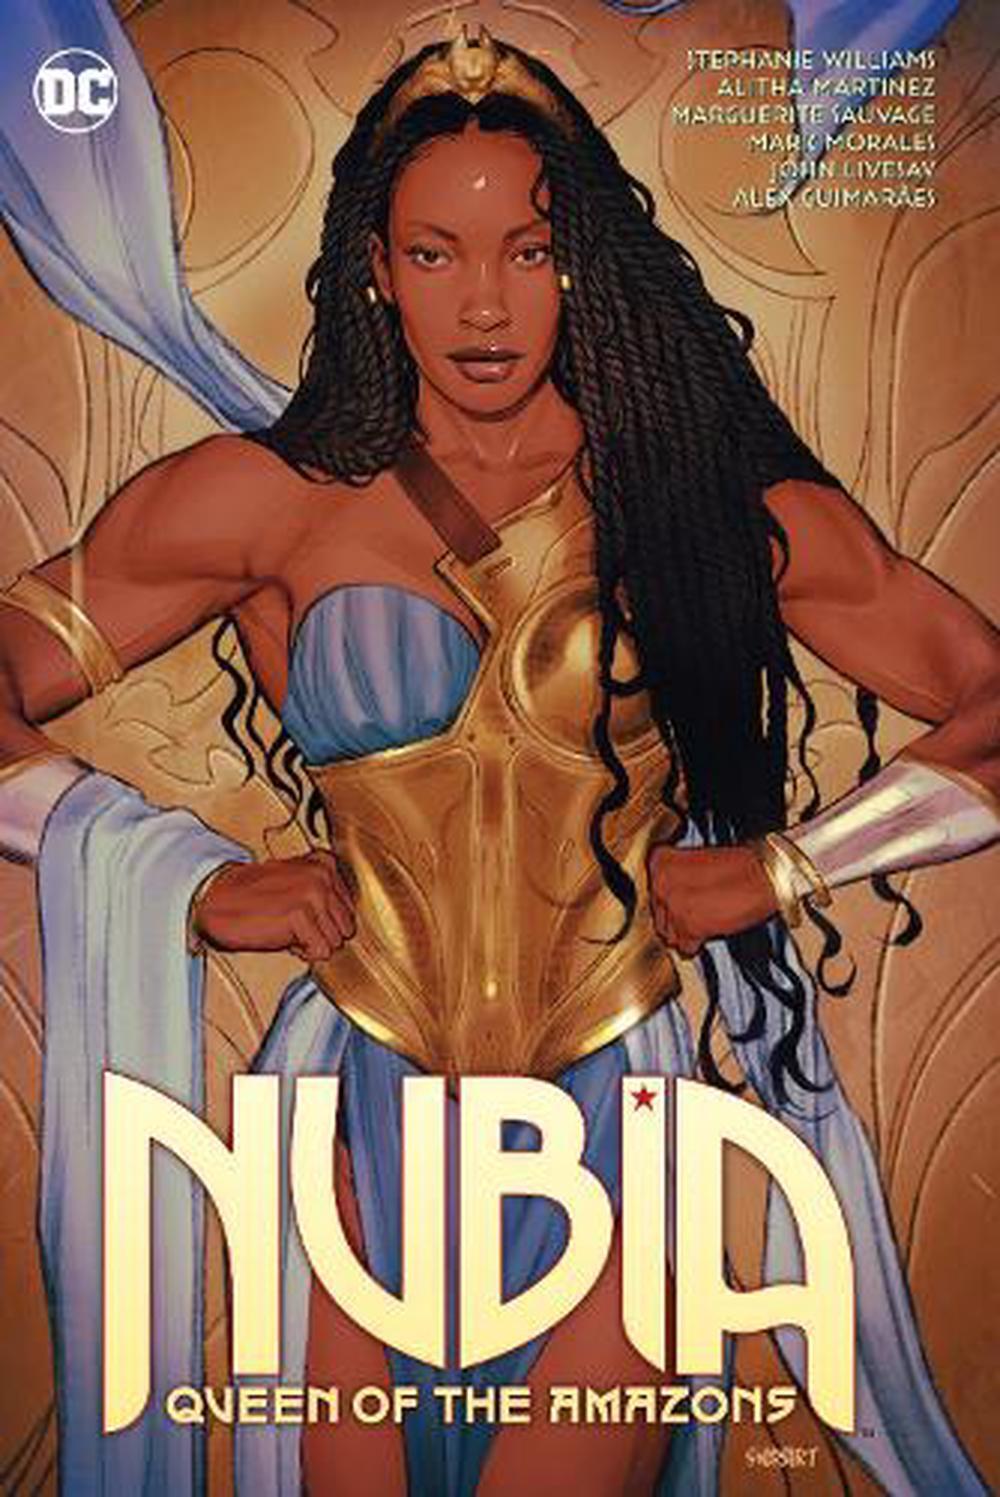 Nubia: Queen of the Amazons by Stephanie Williams (English) Hardcover Book